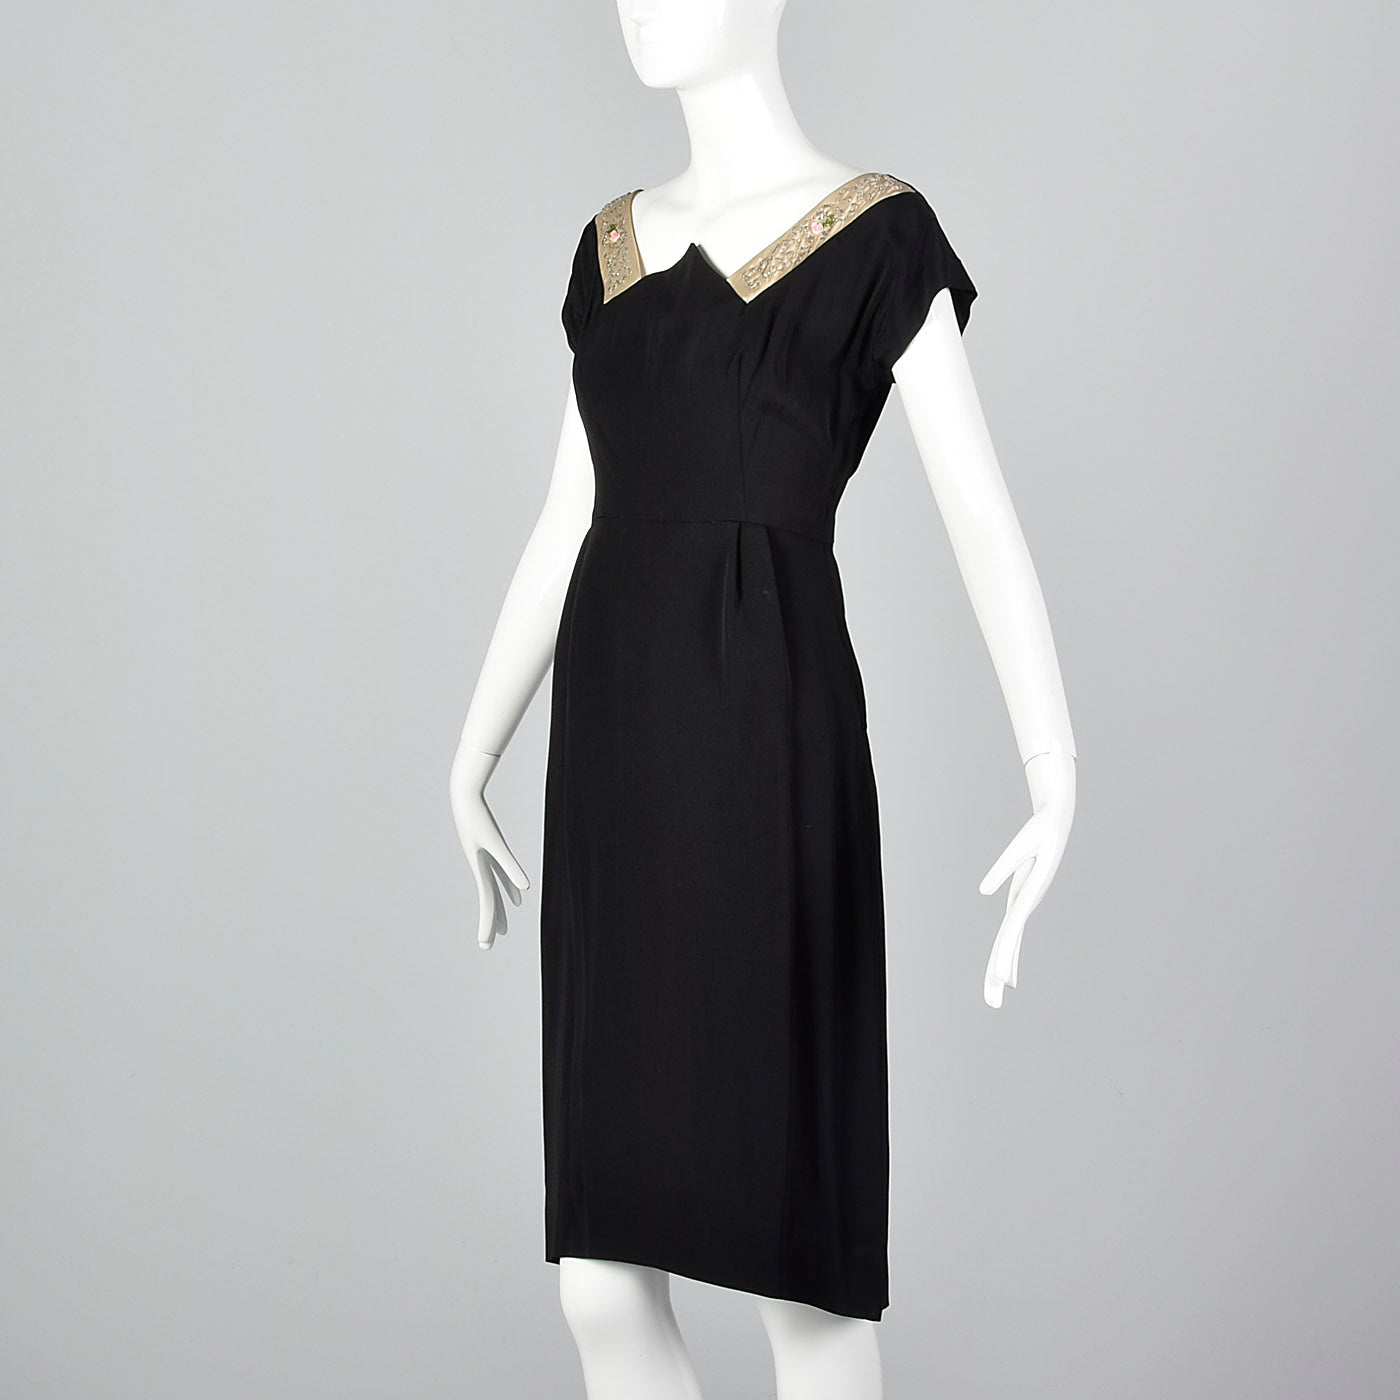 1950s Black Rayon Dress and Jacket with Unique Neckline